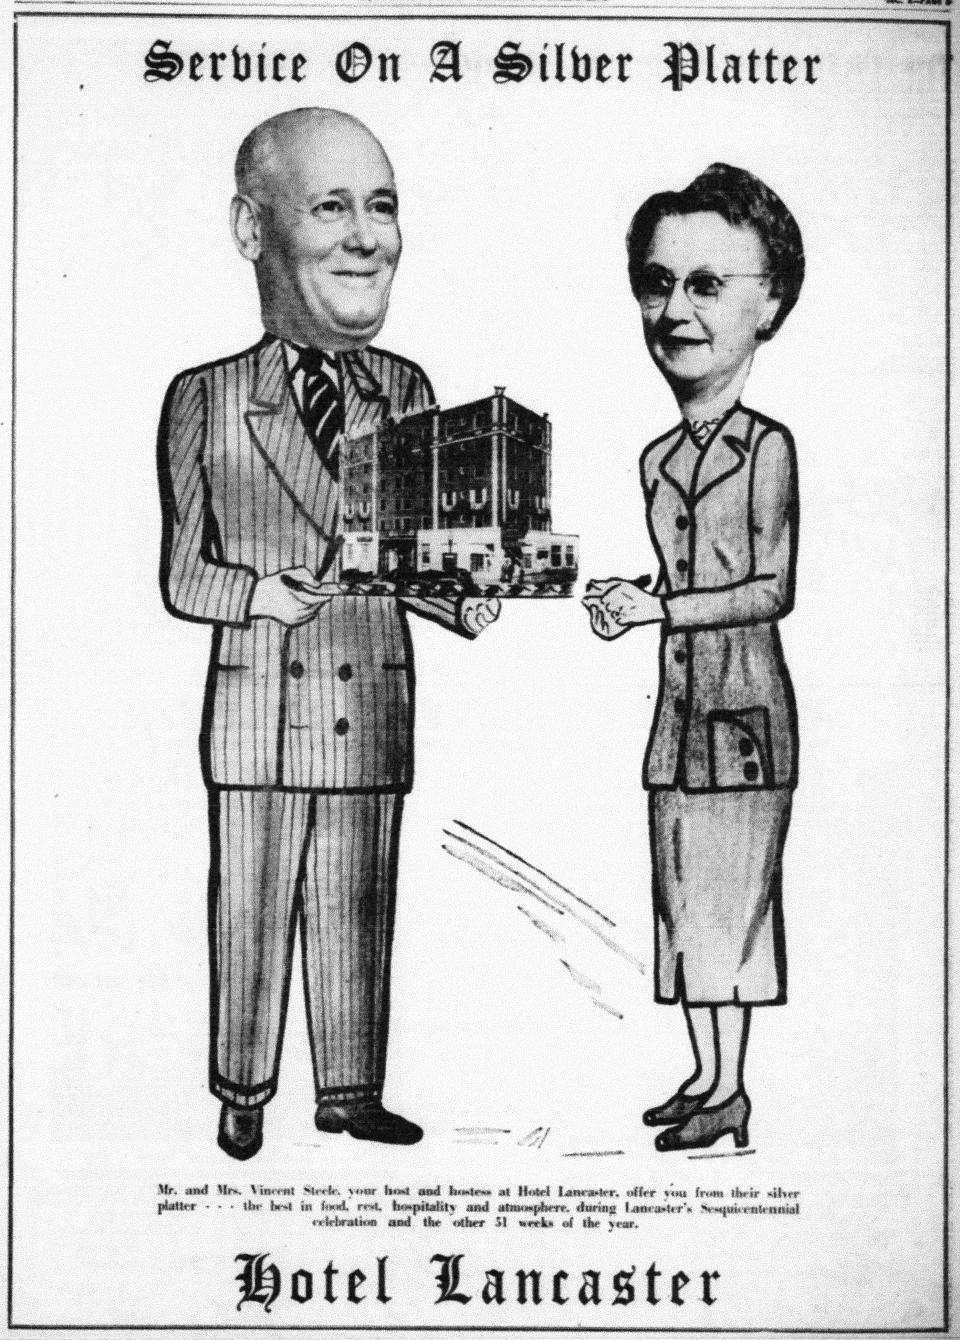 Vincent L. and Helen Steele lived and worked at the Hotel Lancaster beginning in 1942. He was the hotel manager, and she managed the hotel grill and gift shop. They were known 
for their humorous ads. This one appeared in the Eagle-Gazette June 3, 1950 offering "Service on a Silver Platter."